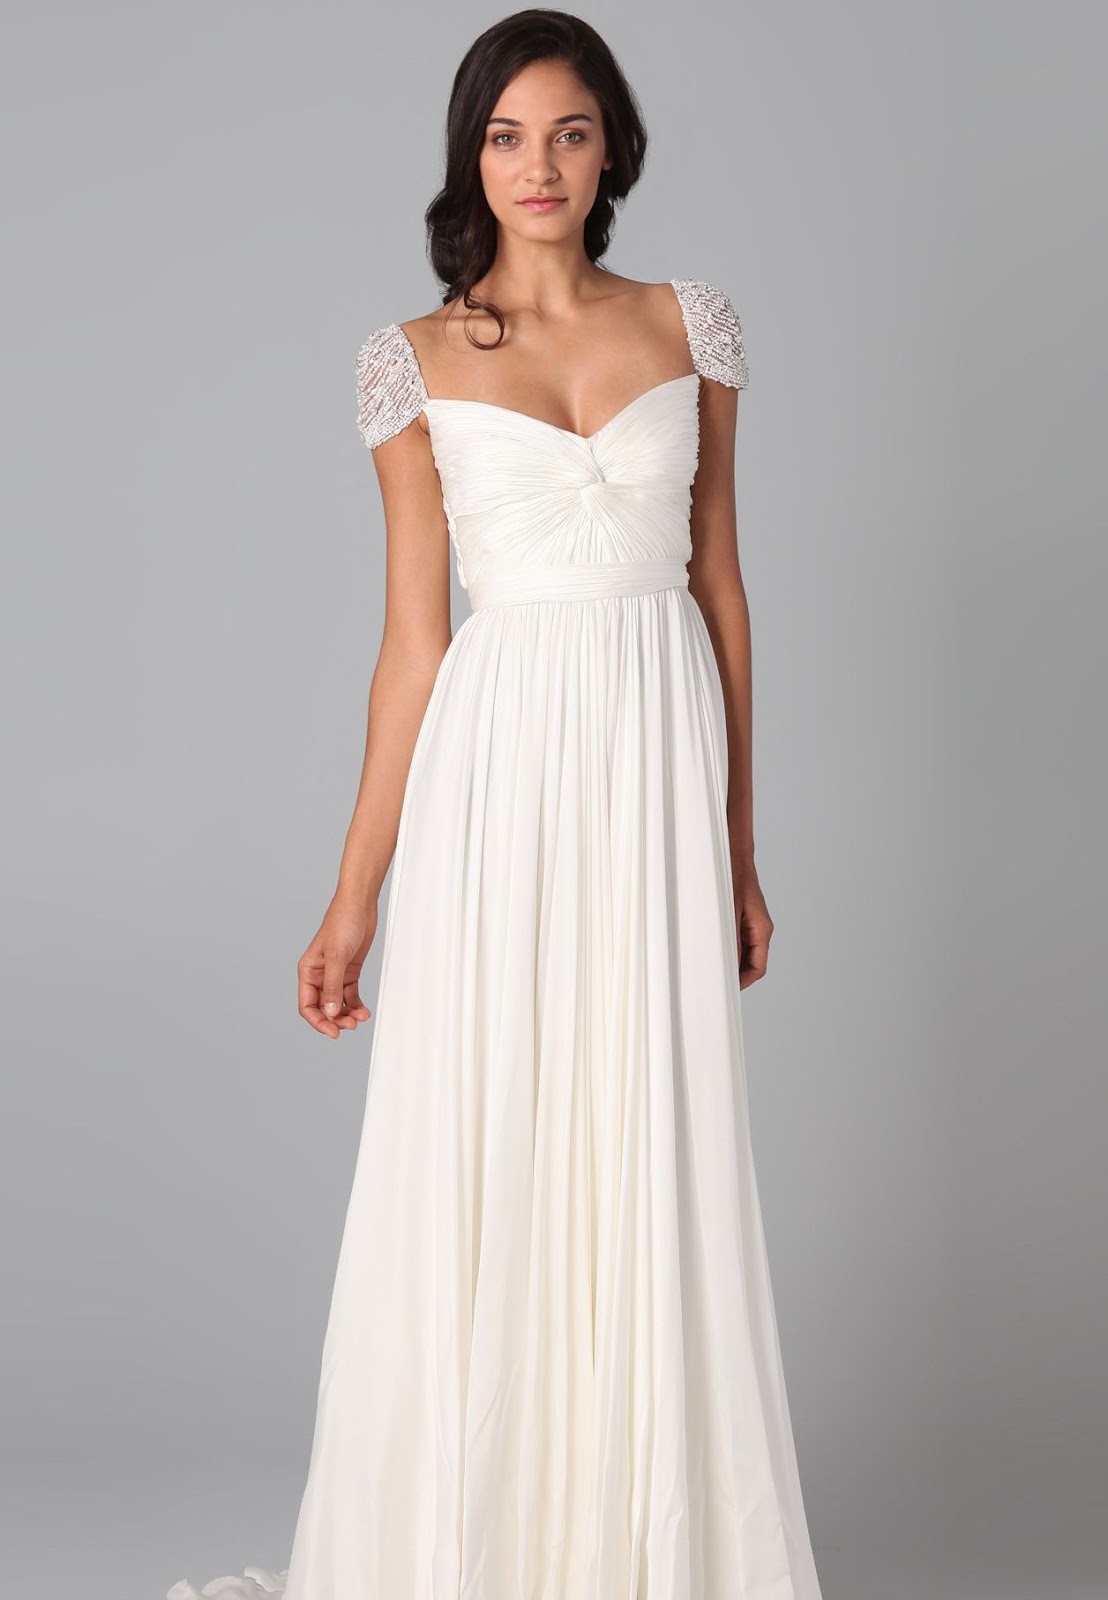 RainingBlossoms: Elegant Bridal Gowns with Cap Sleeves